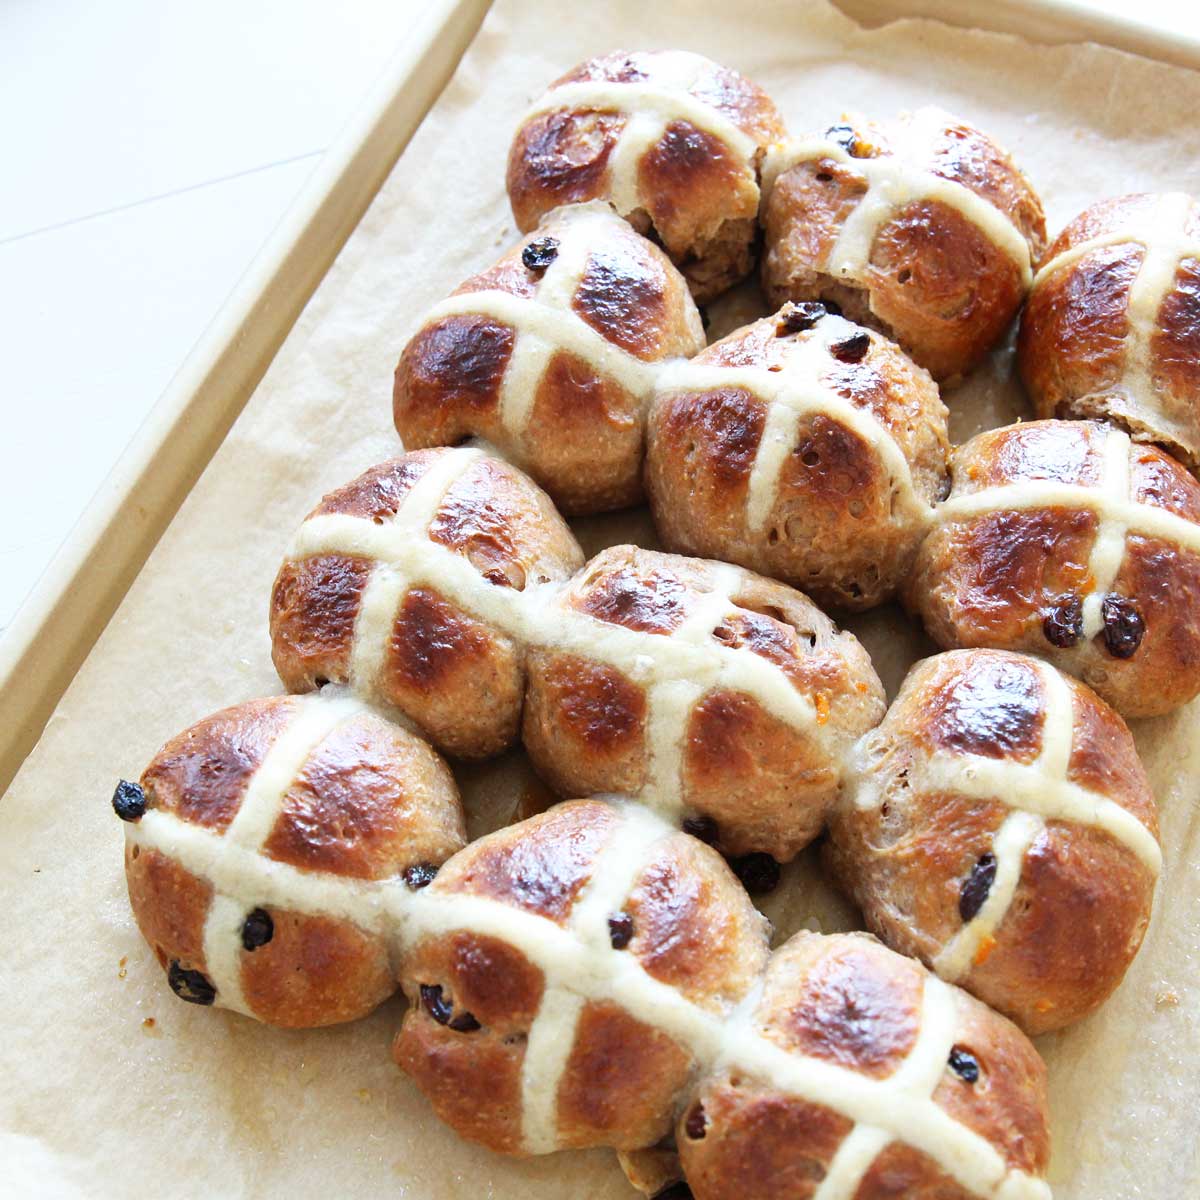 Soft & Fluffy Ricotta Cheese Hot Cross Buns - Perfect for Easter! - Ricotta Cinnamon Rolls